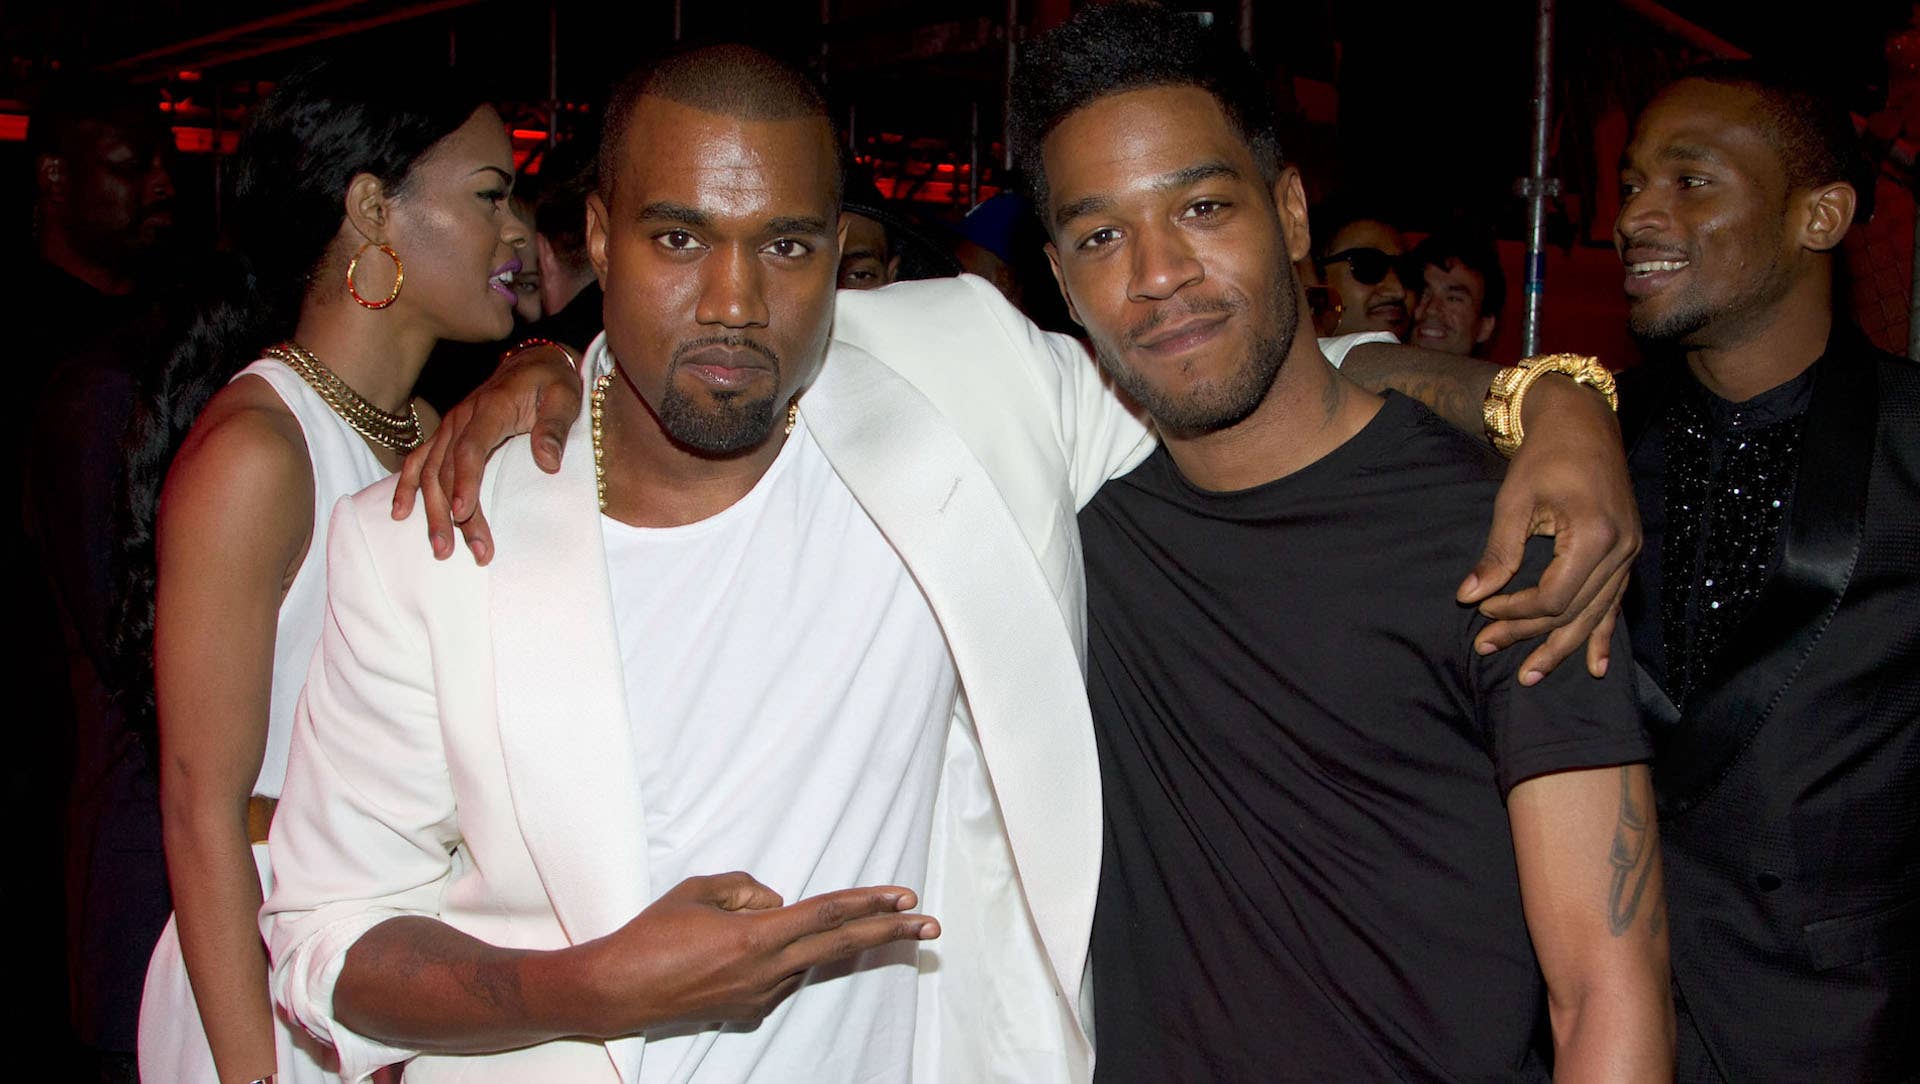 anye West and Kid Cudi attend The "Cruel Summer" Presentation by Kanye West during the 65th Annual Cannes Film Festival